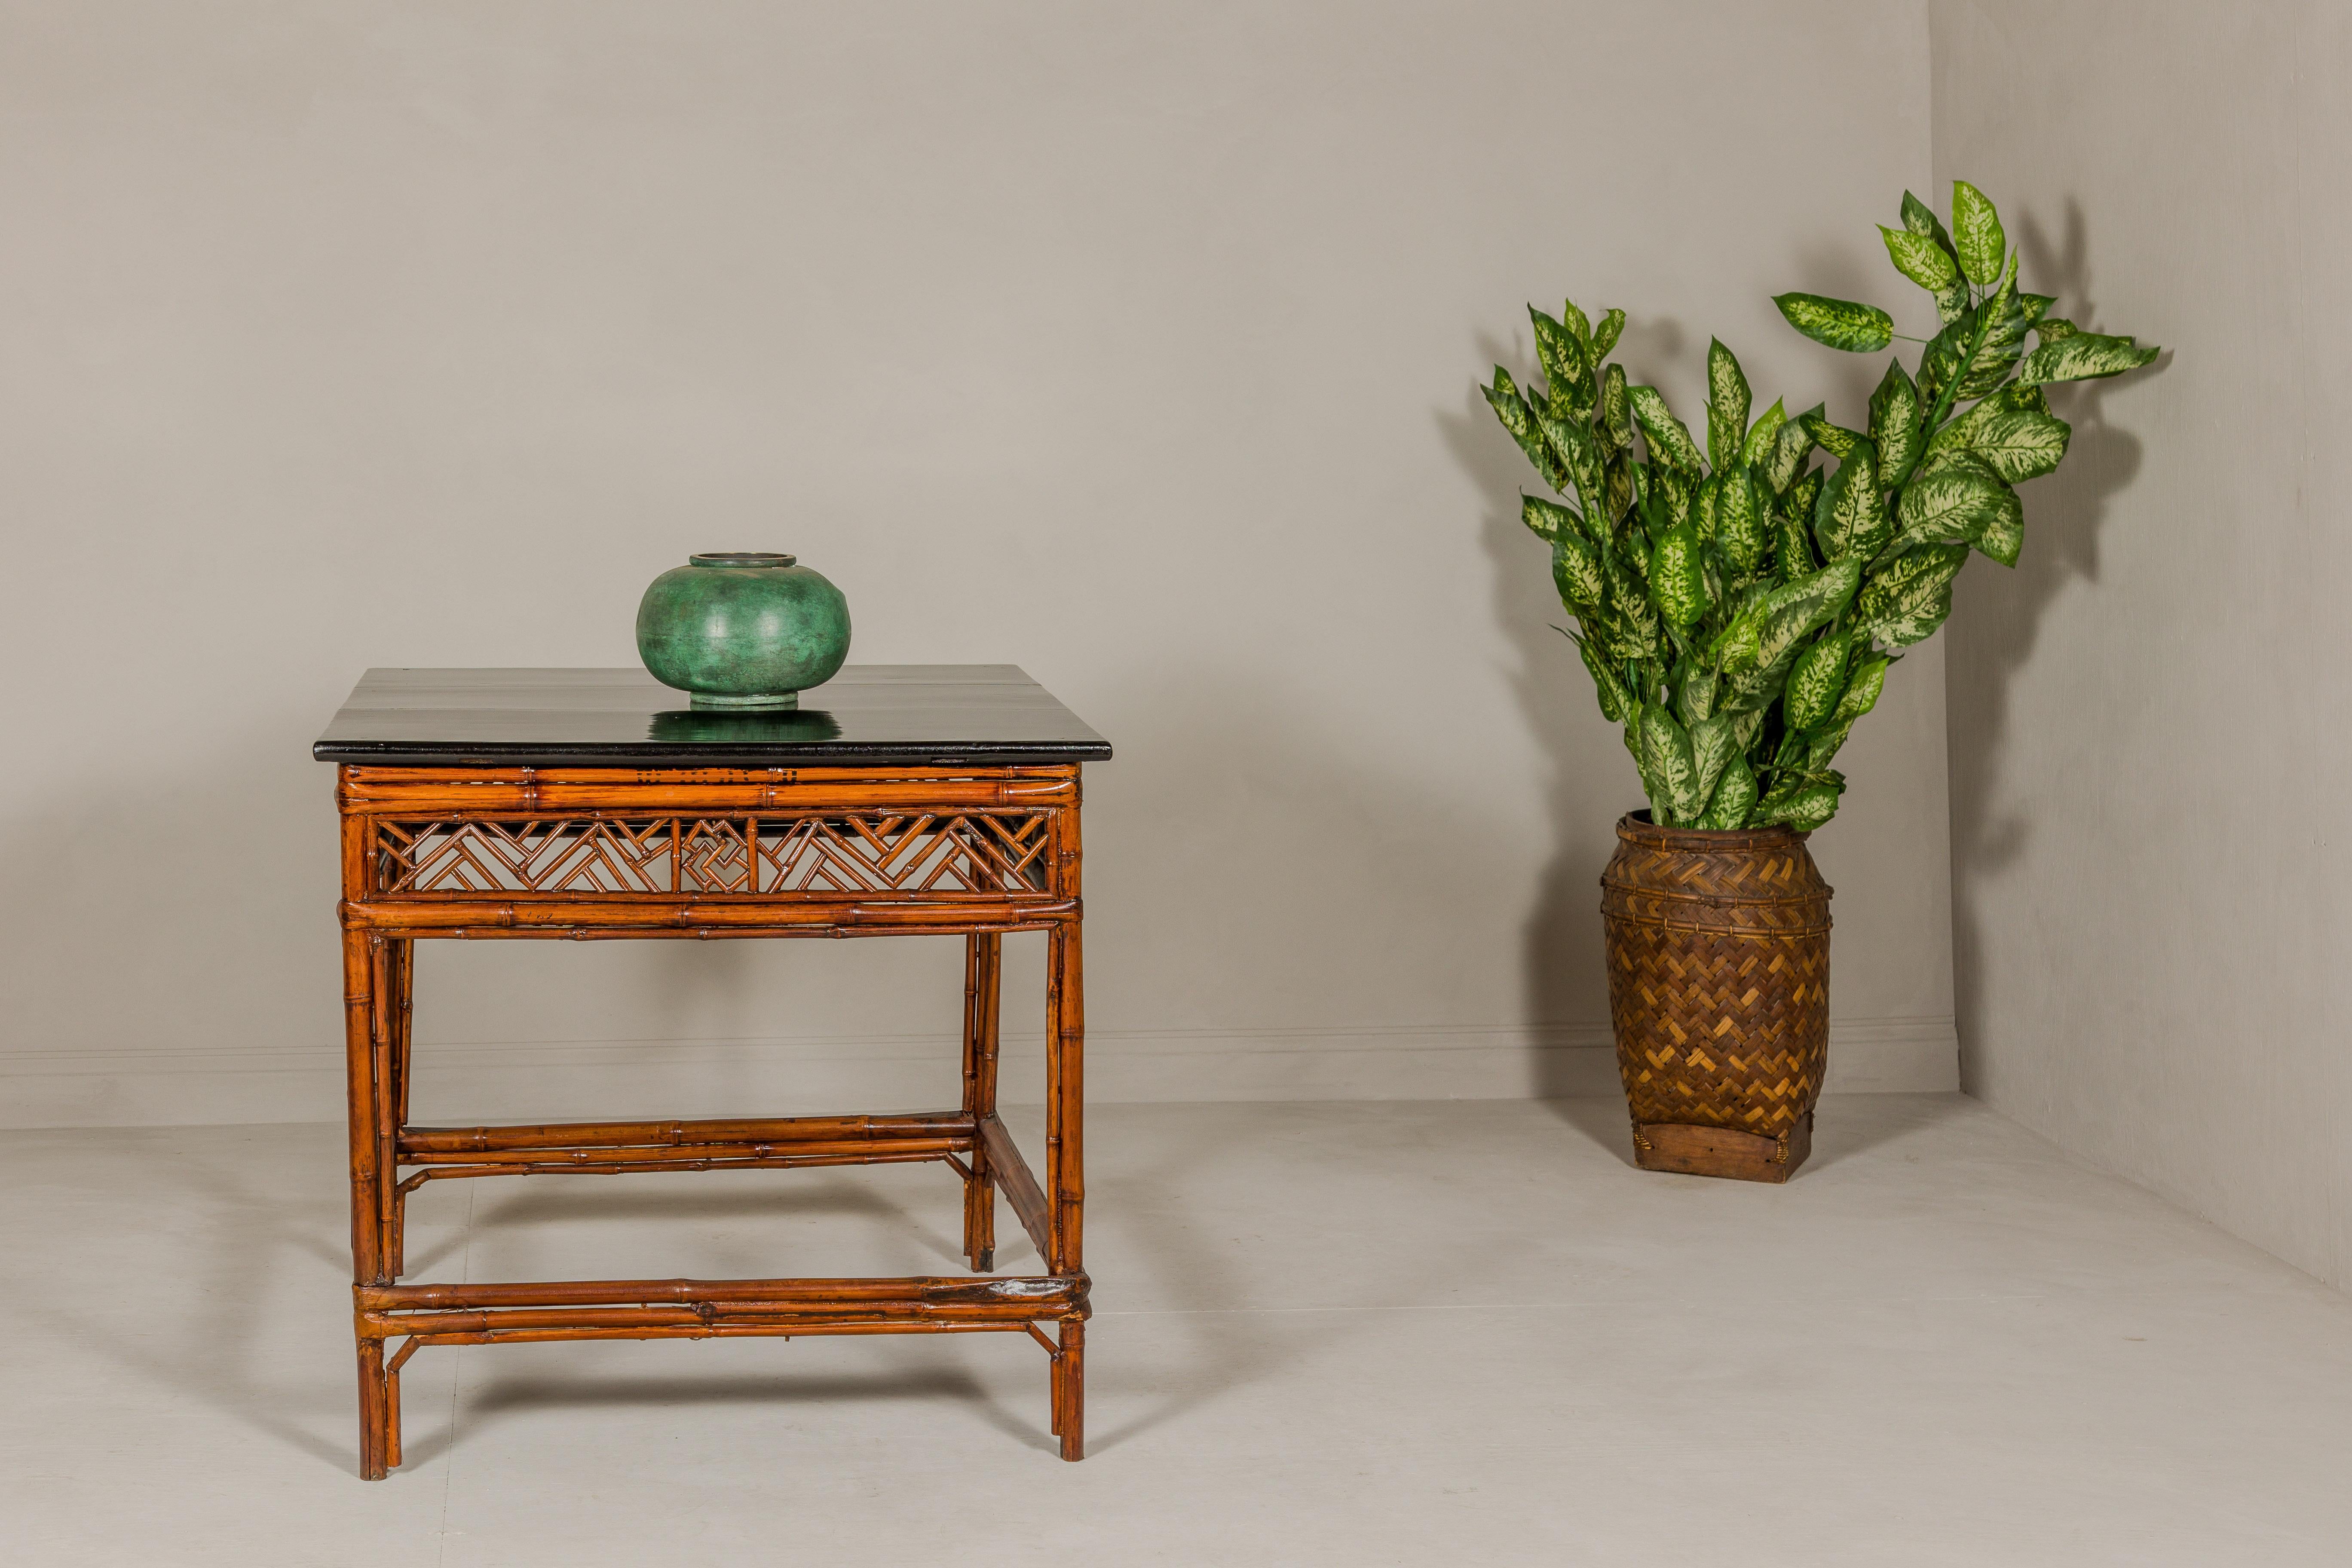 A Chinese Qing Dynasty bamboo square shaped center table with geometric apron and black lacquered top. This Chinese Qing Dynasty bamboo center table, with its square shape and distinctive design, is a remarkable piece that reflects the intricate